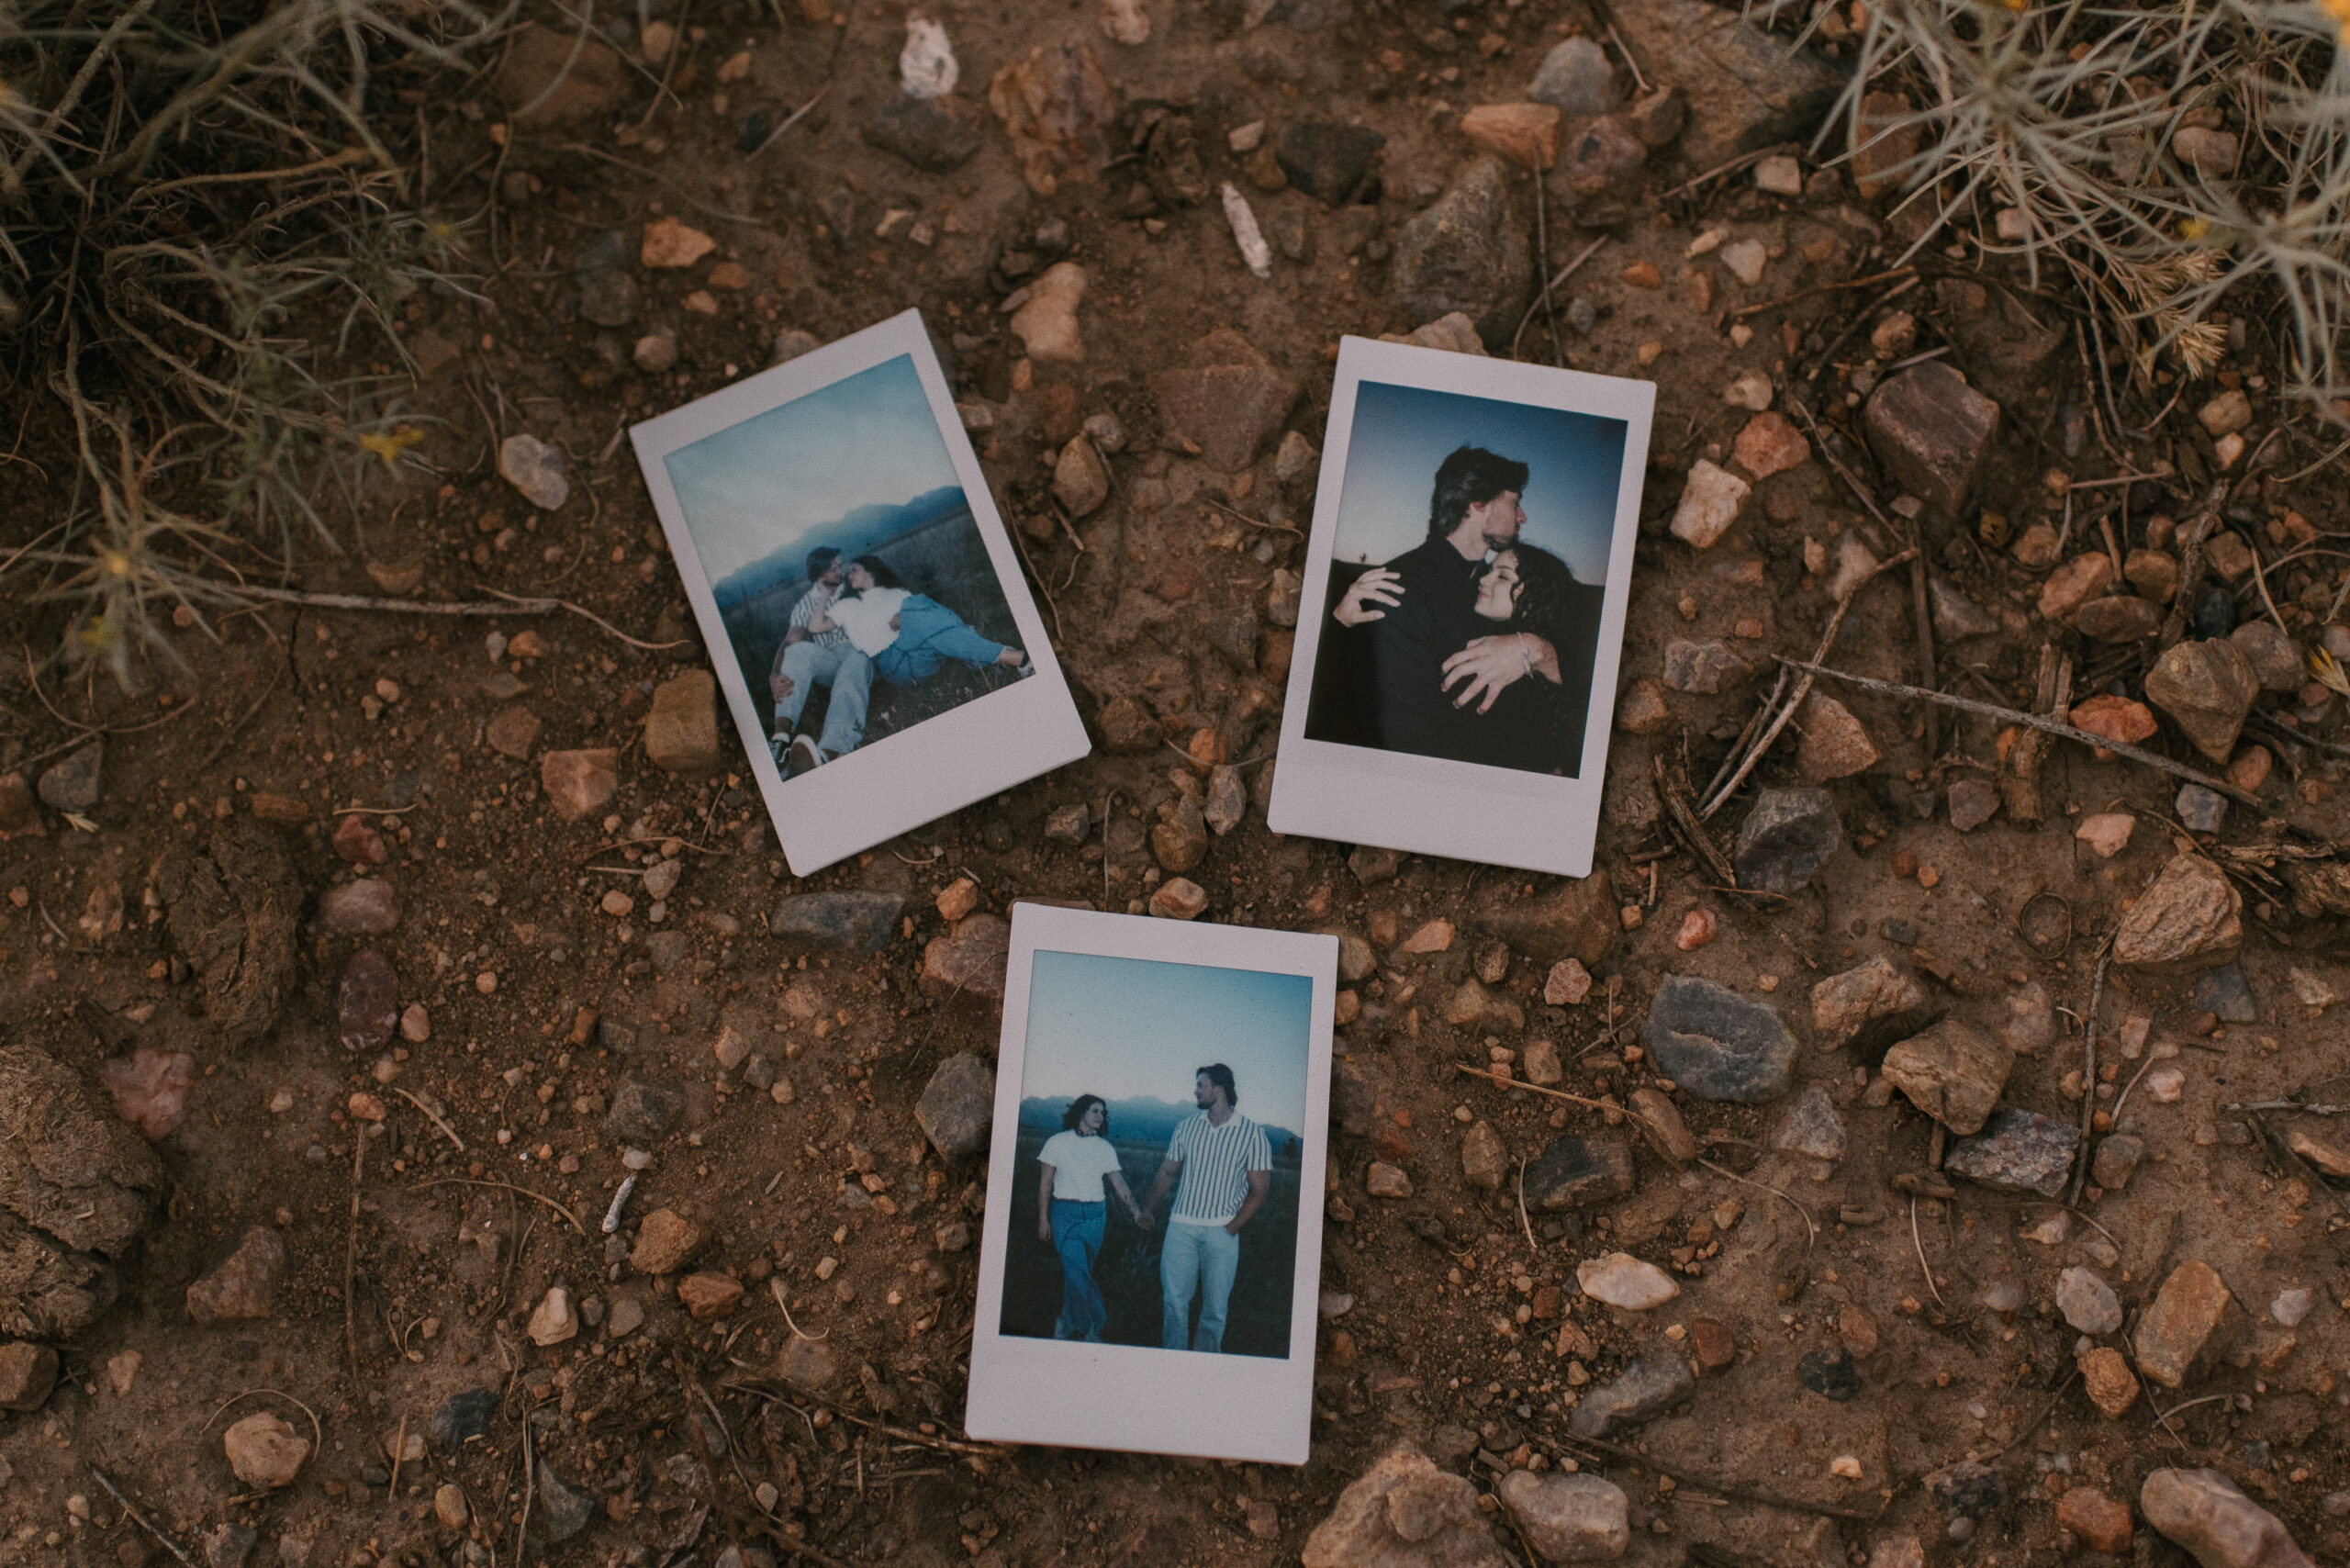 polaroid pictures from the couples photoshoot laying on the ground